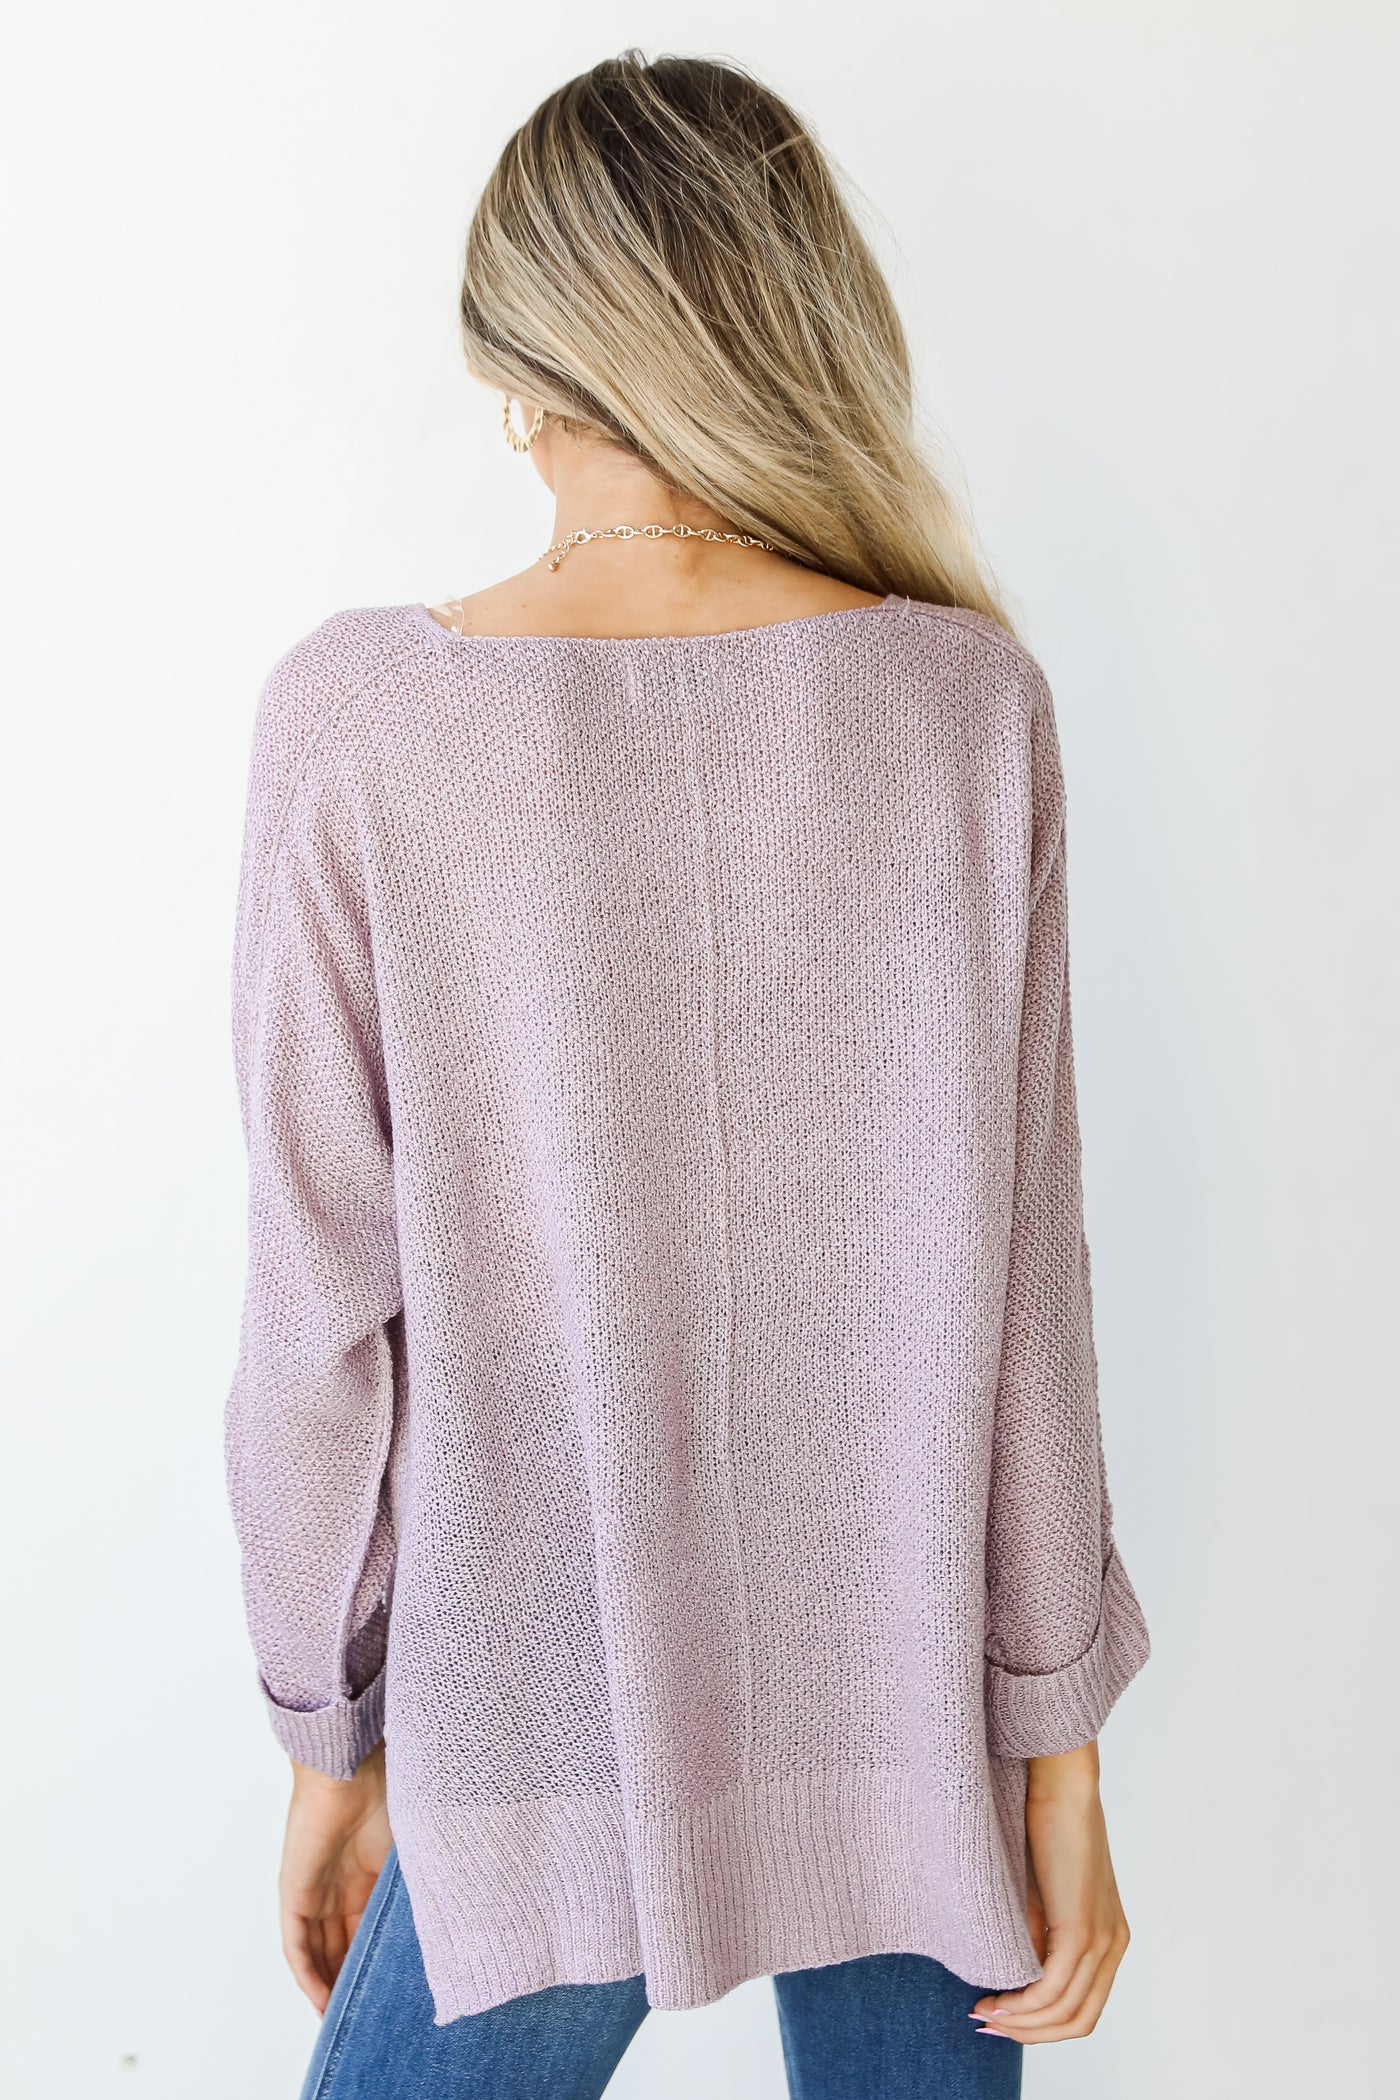 Knit Top in lavender back view